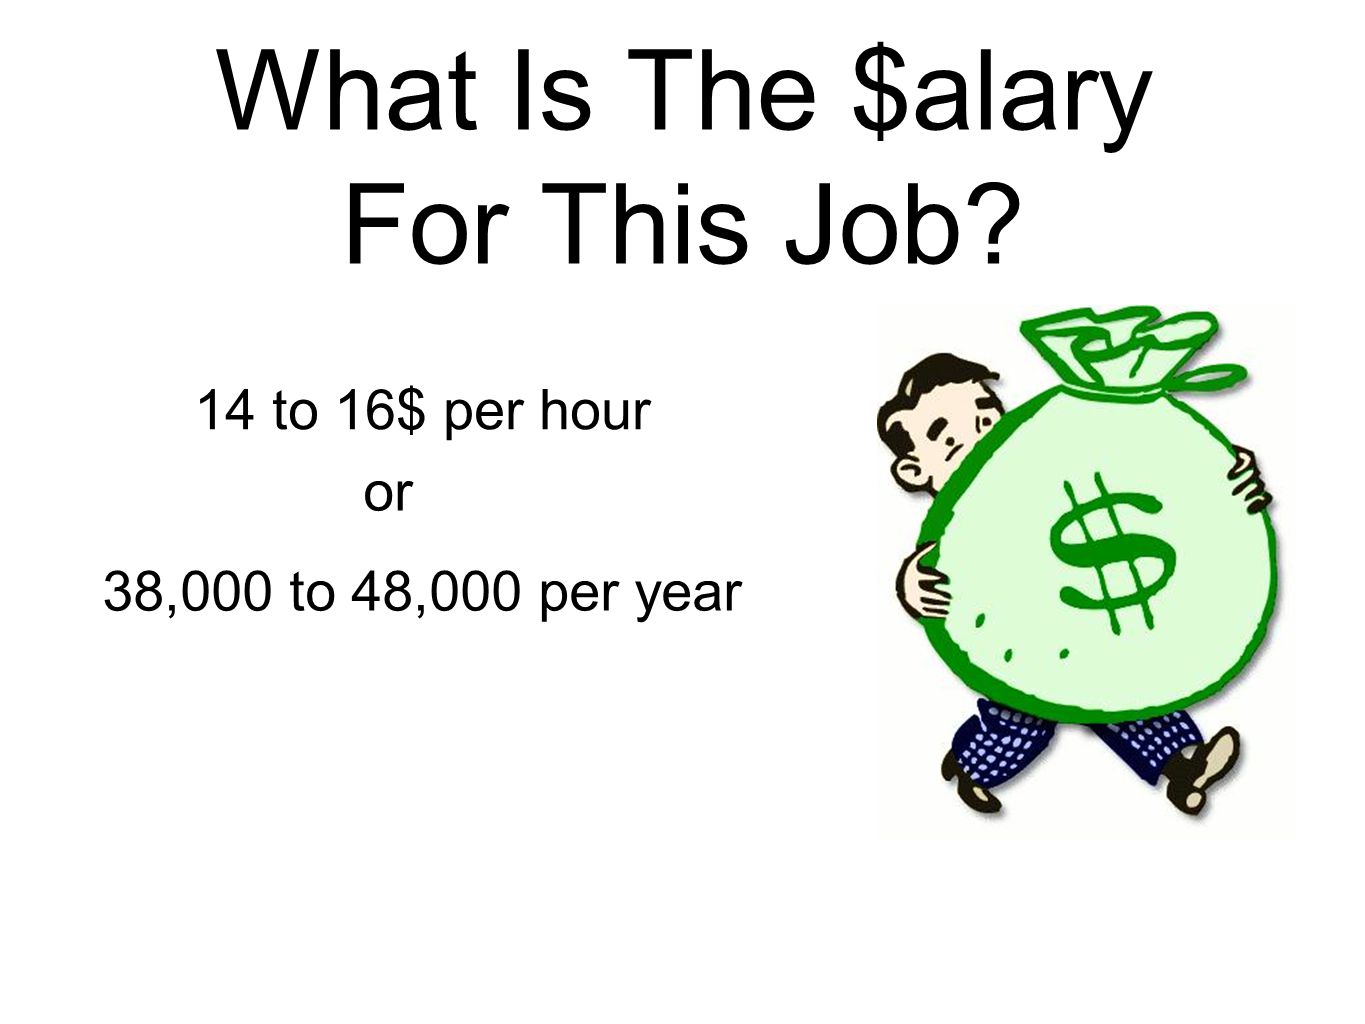 What Is The $alary For This Job 14 to 16$ per hour or 38,000 to 48,000 per year